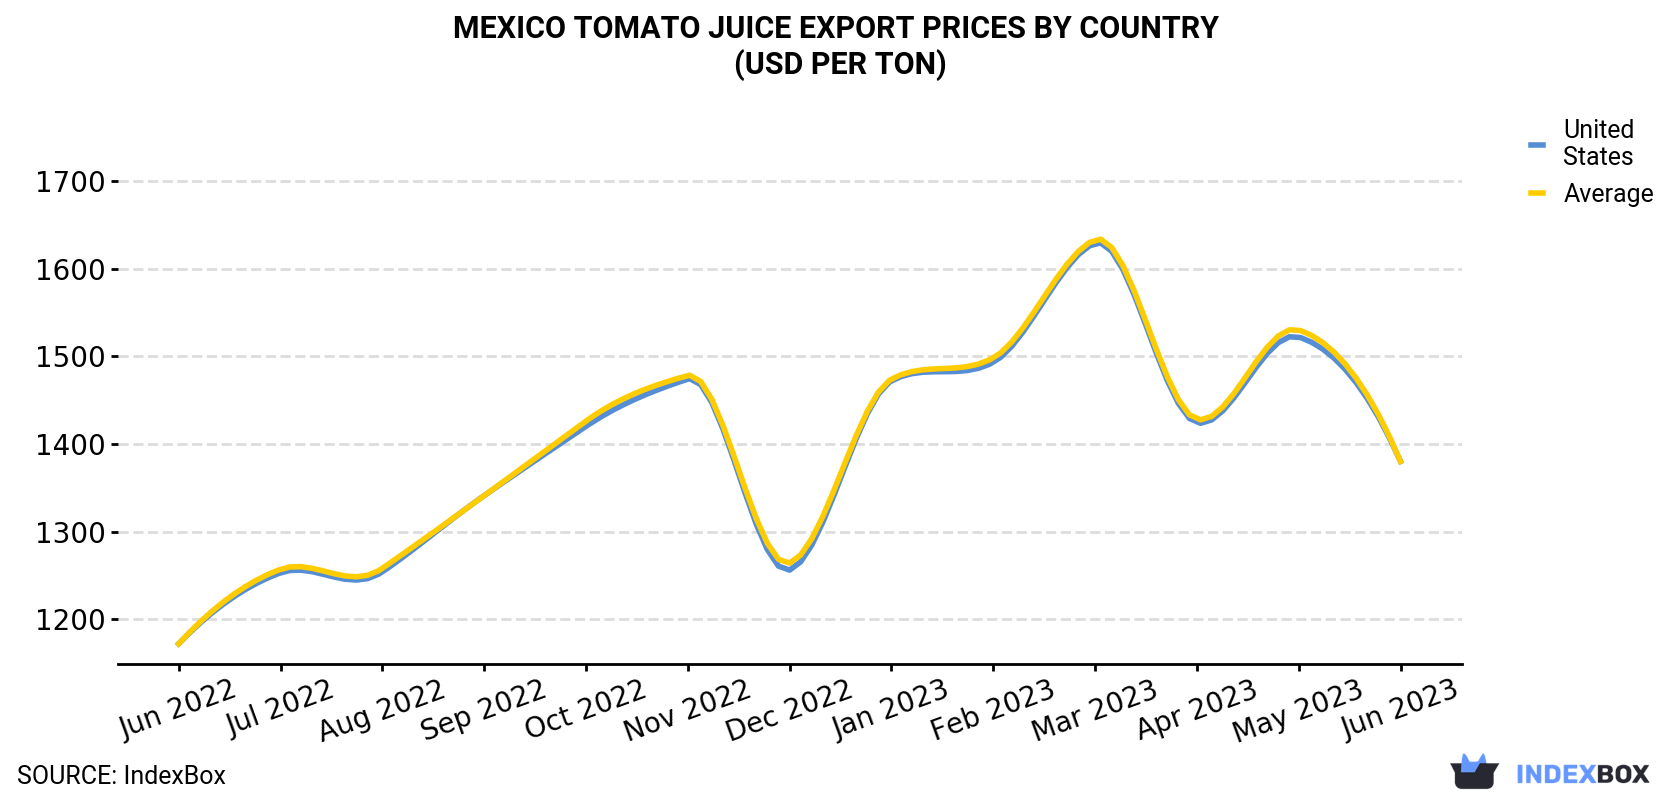 Mexico Tomato Juice Export Prices By Country (USD Per Ton)